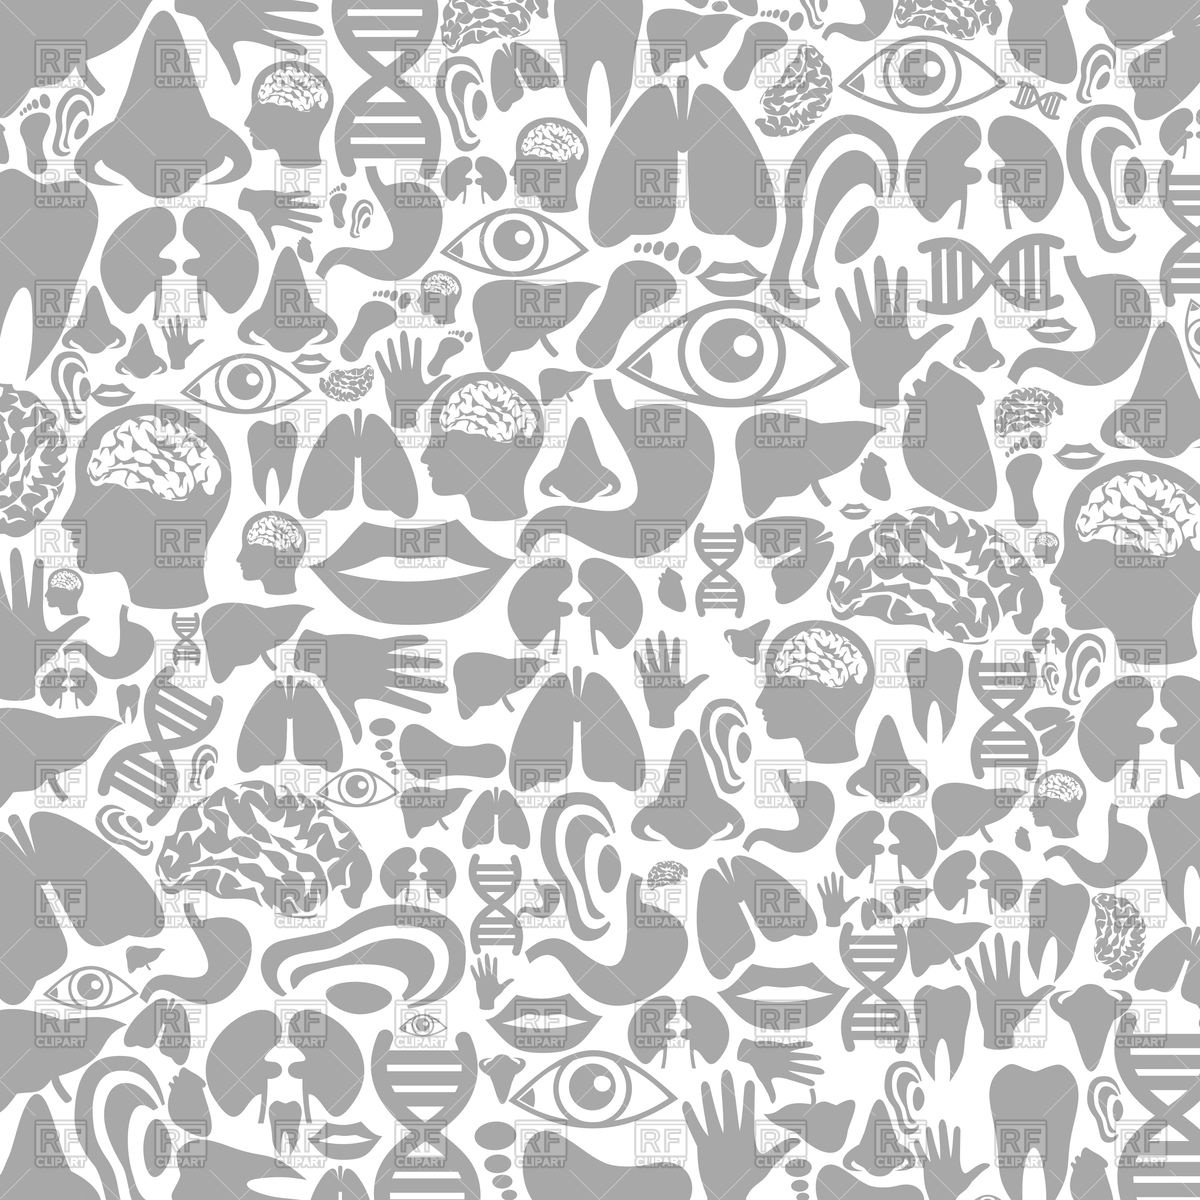 Background with body parts Vector Image of Backgrounds Textures